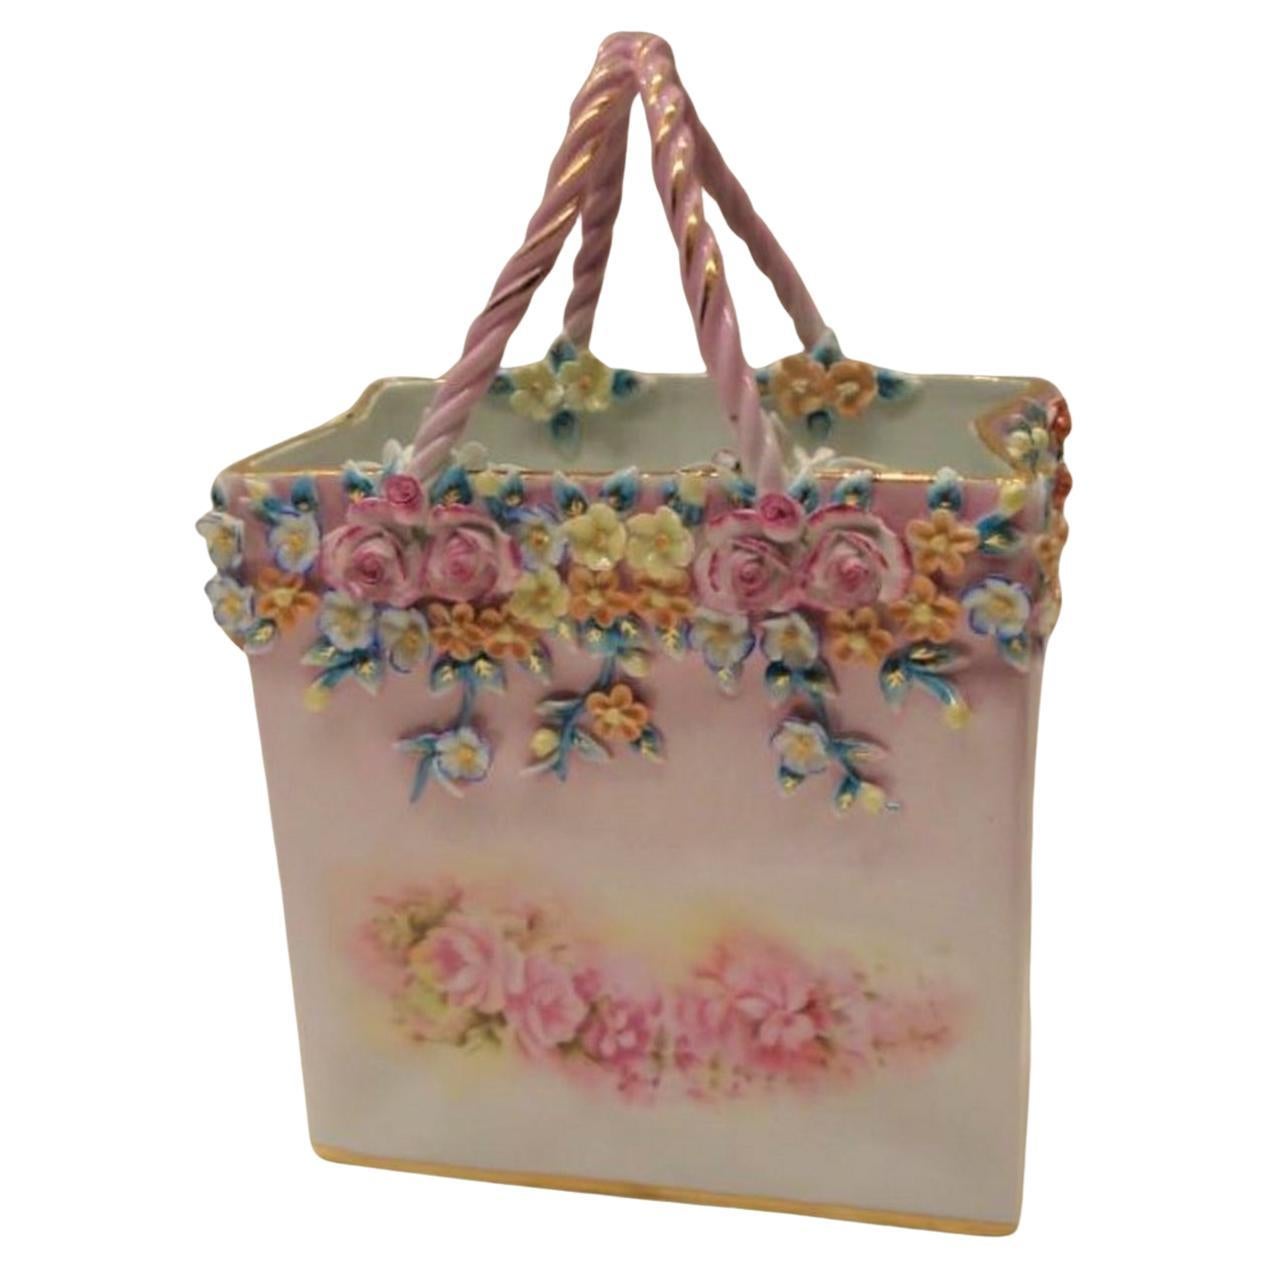 Rare Important Gorgeous Sevres / Dresden Style Porcelain Floral Shopping Bag For Sale